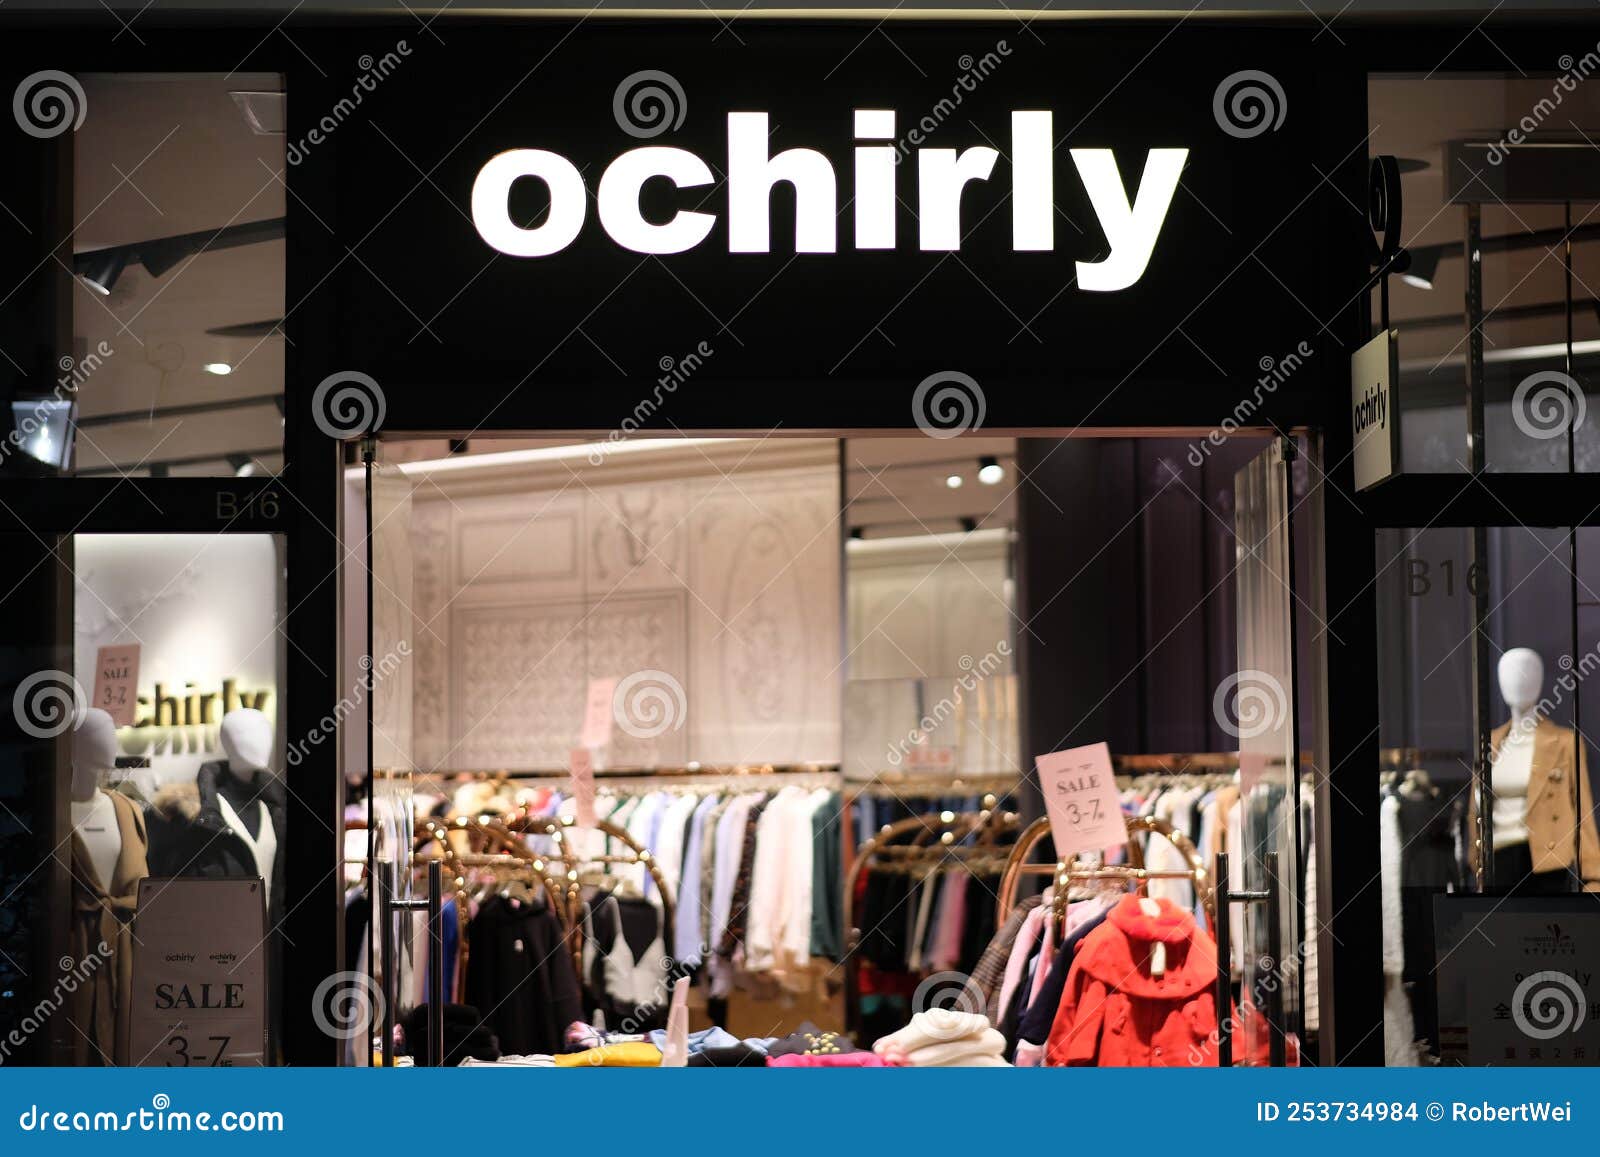 Facade of Ochirly Clothing Store Editorial Stock Image - Image of ...